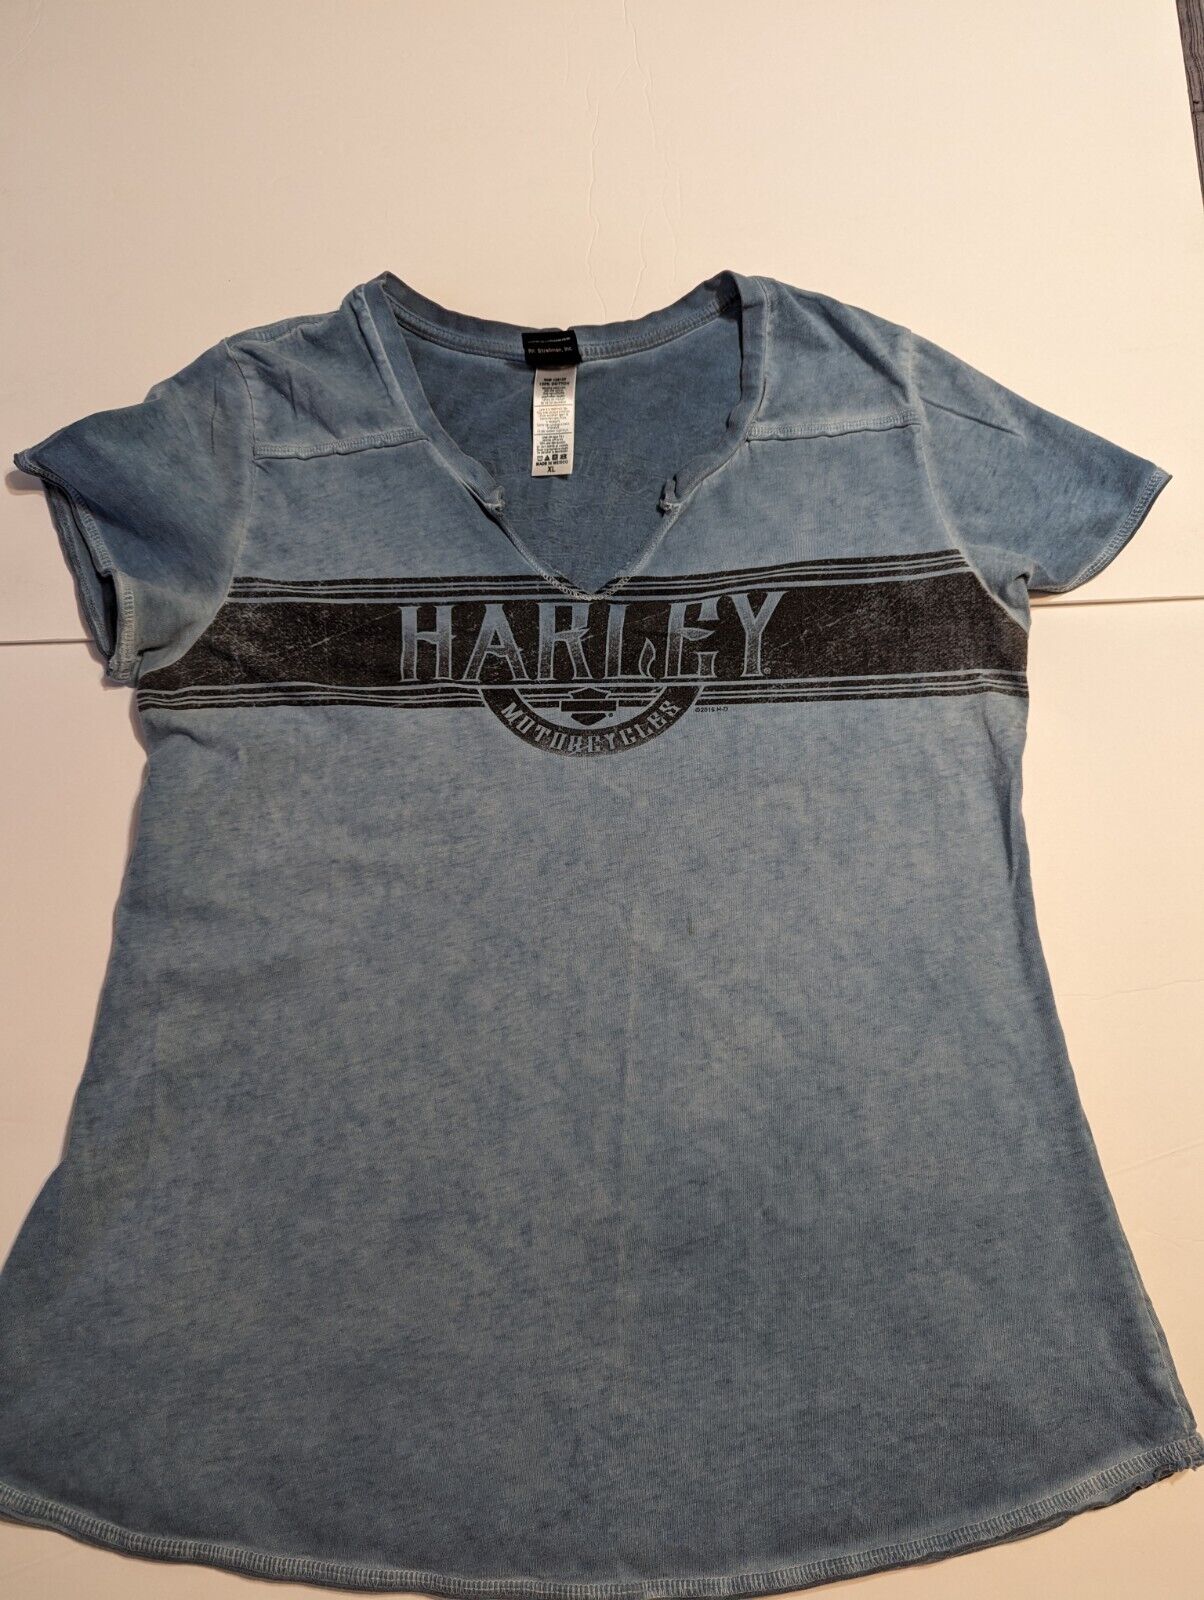 2019 Harley Davidson Blue Distressed RG's Almost Heaven Women's Tee Size XL